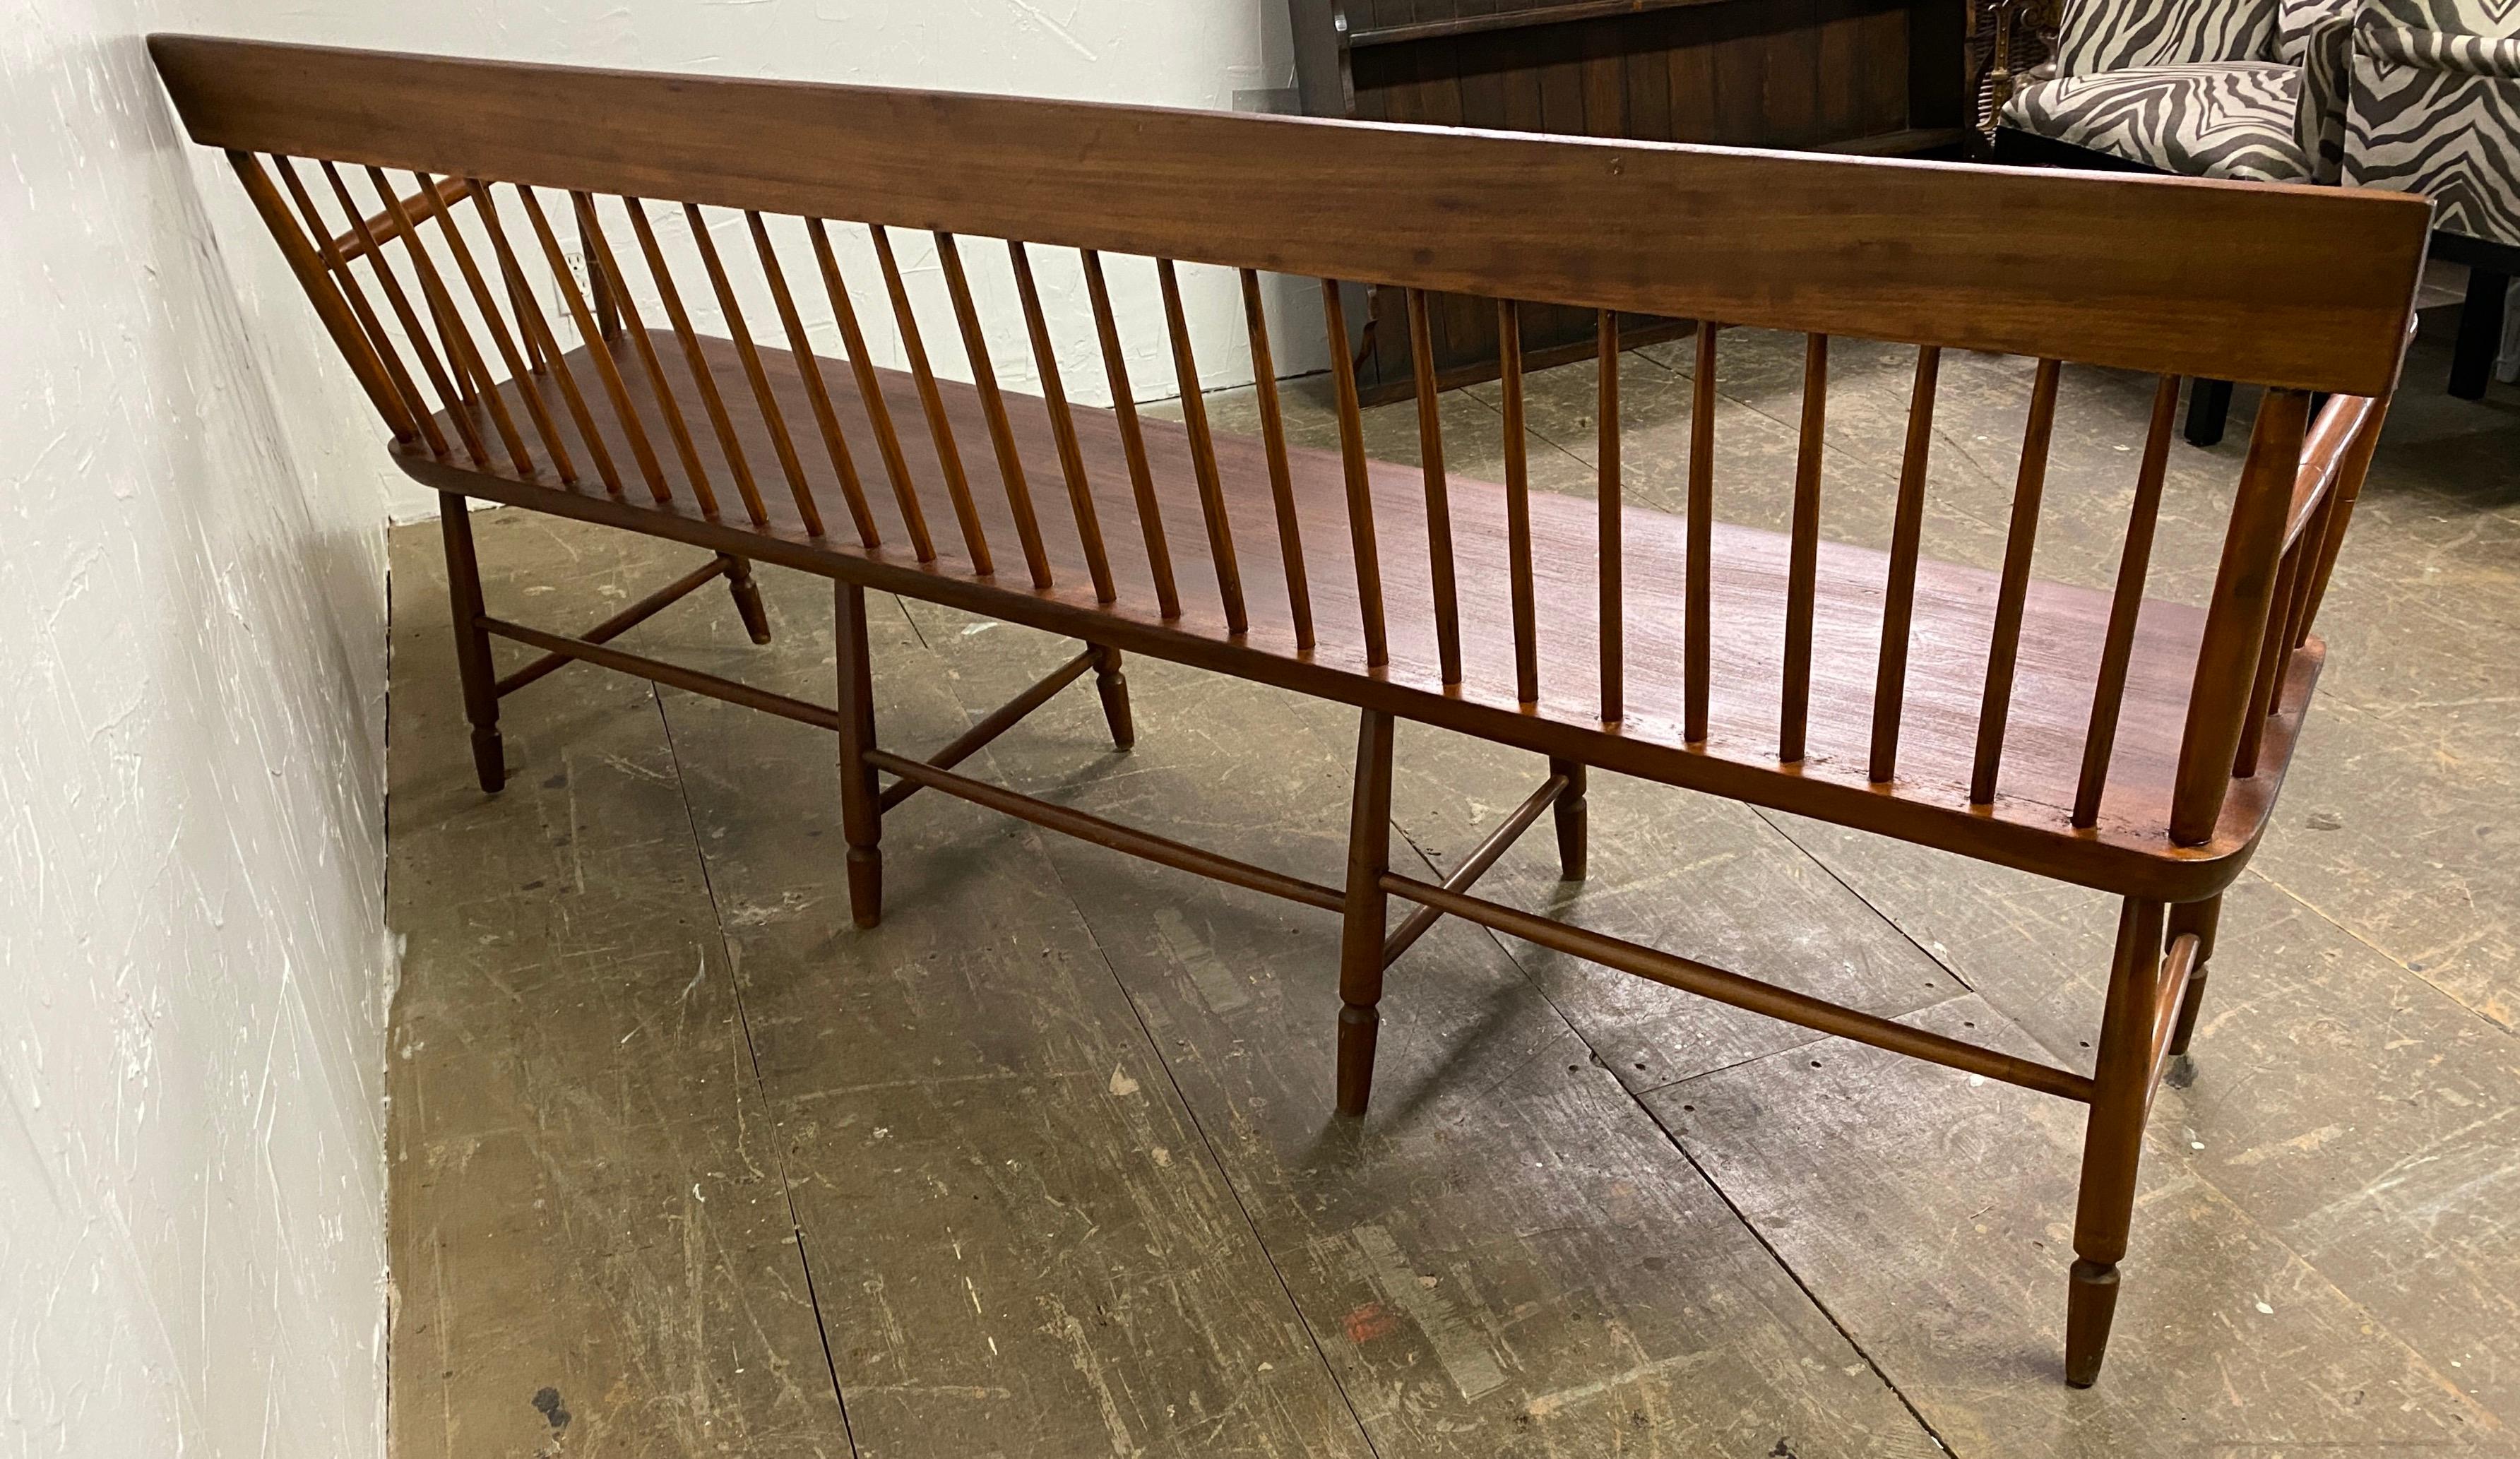 American colonial style spindle bench, features a single back splat with spindles and arms over a plank seat the bench is supported by eight legs connected by splindled stretcher. Great for use as a hall bench, mudroom bench or extra dining room